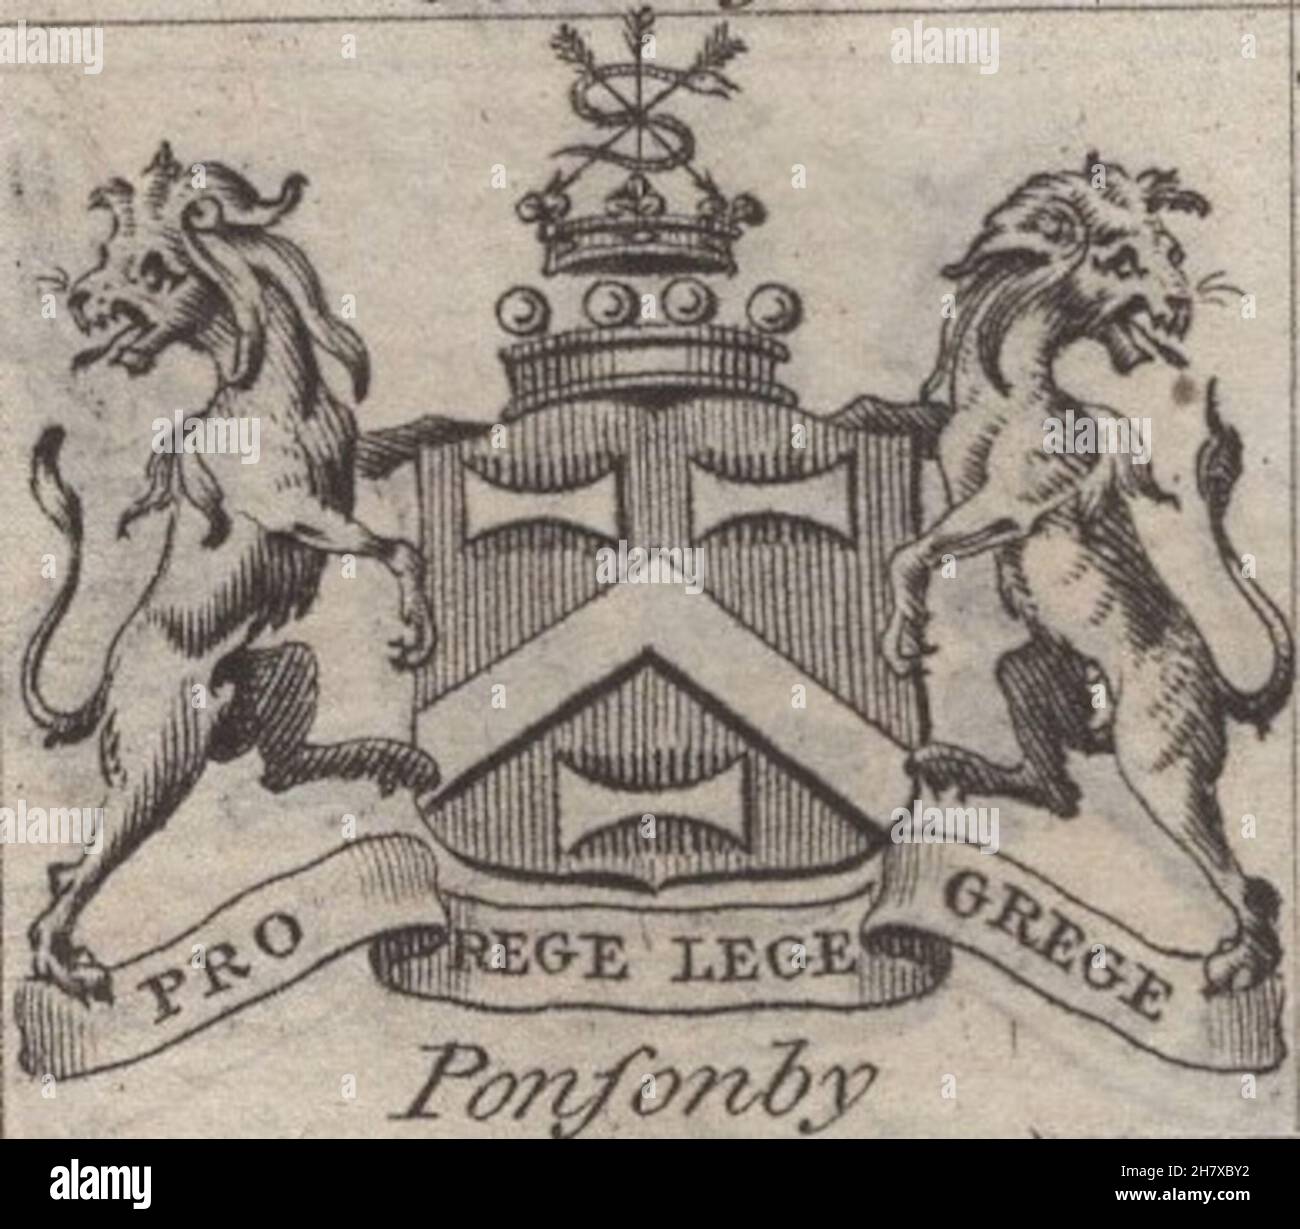 antique 18th century engraving heraldy coats of arms, English Barons, Motto / slogan: Pro Rege Lege Grege. Ponsonby. by Woodman & Mutlow fc russel co circa 1780s Source: original engravings from  the annual almanach book. Stock Photo